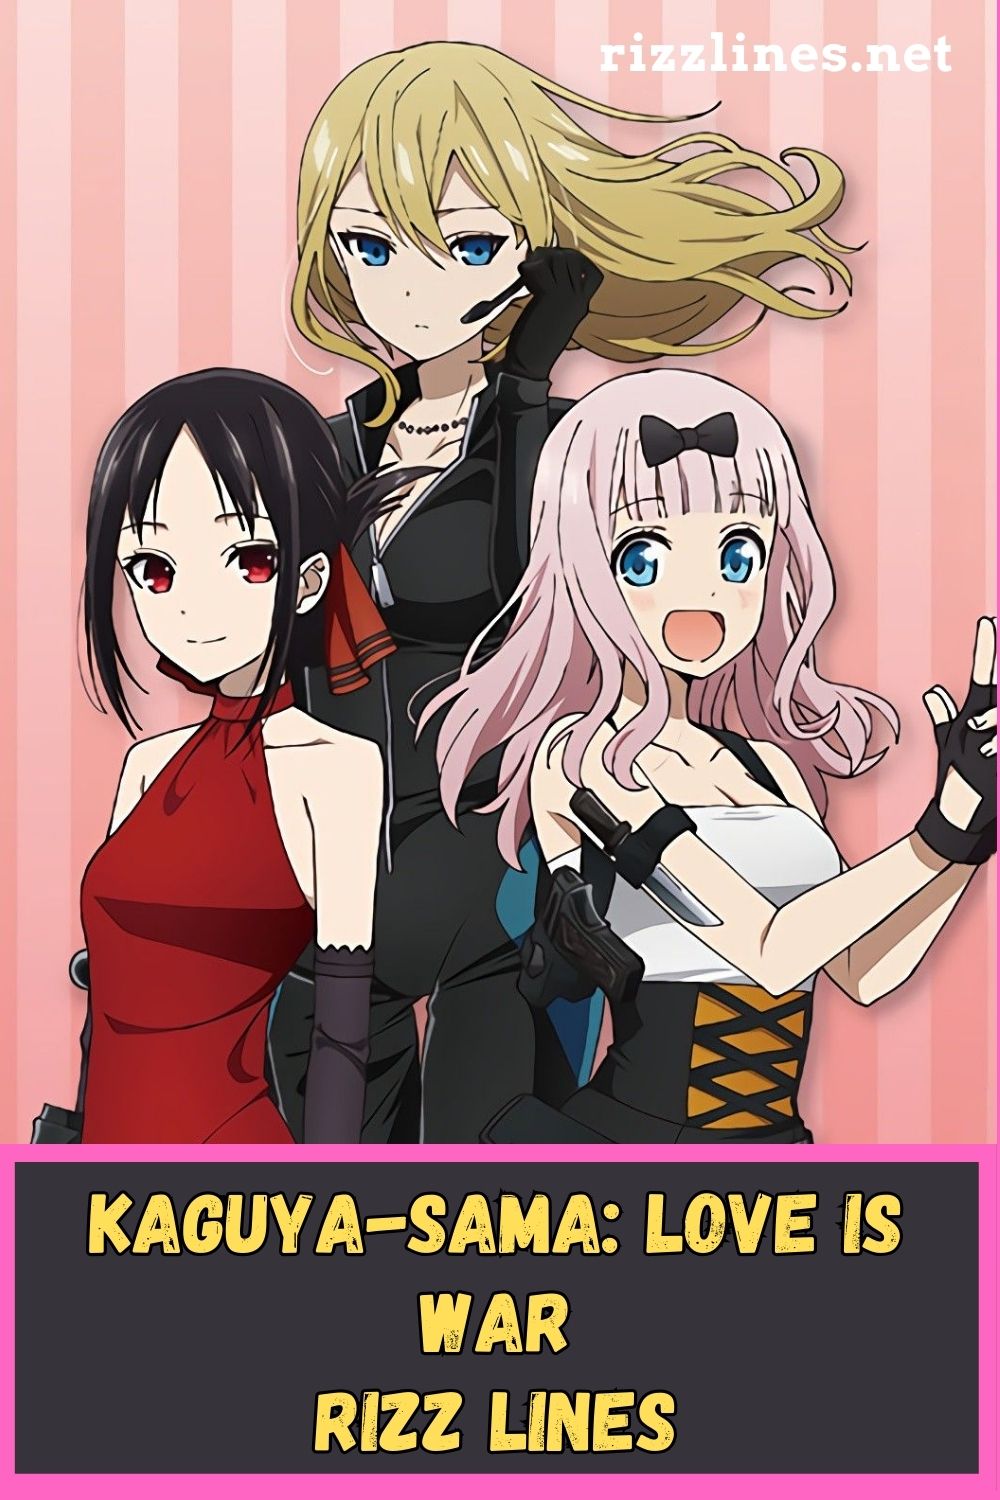 Kaguya-Sama: Love Is War, Kaguya-sama Love is War Rizz Lines